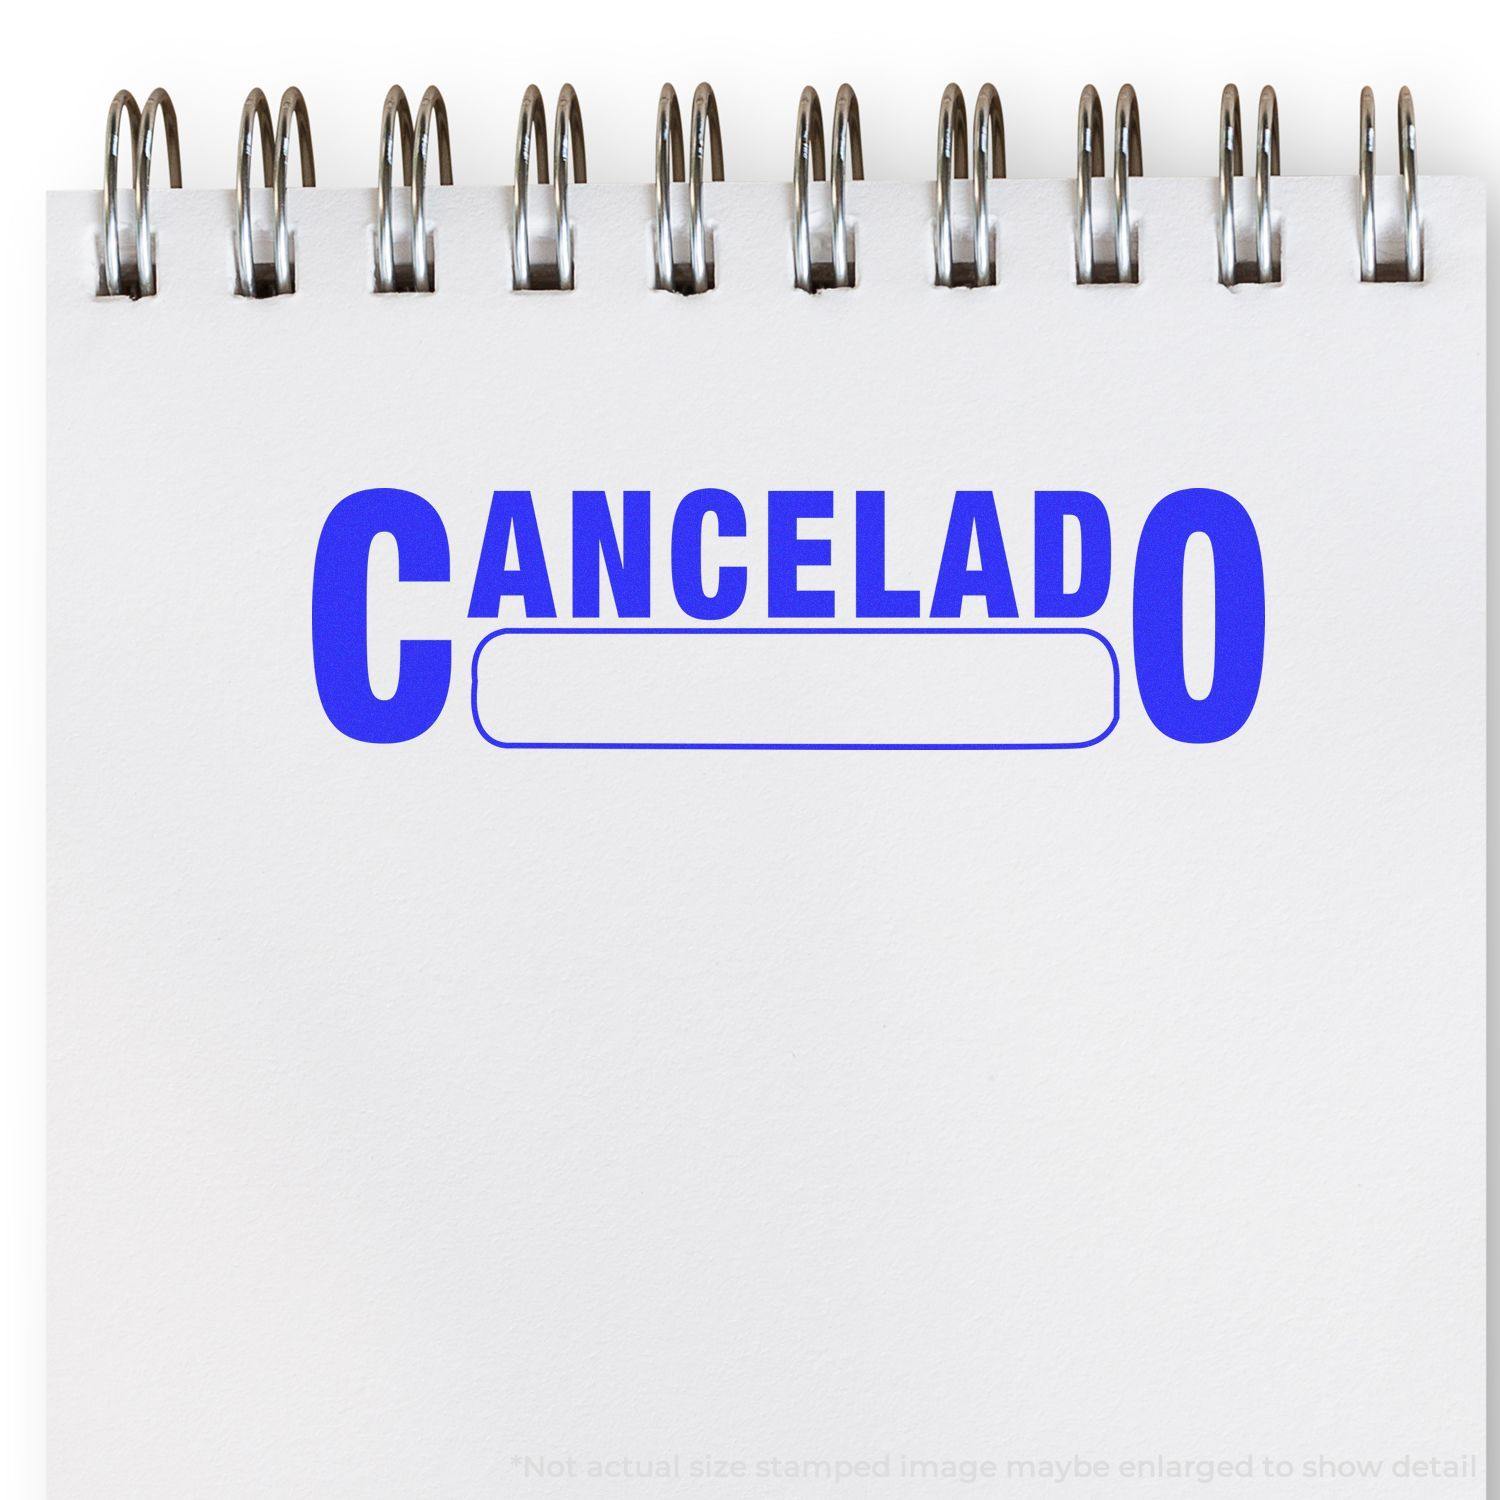 A self-inking stamp with a stamped image showing how the text "CANCELADO" (with a box underneath) in a large font is displayed by it after stamping.